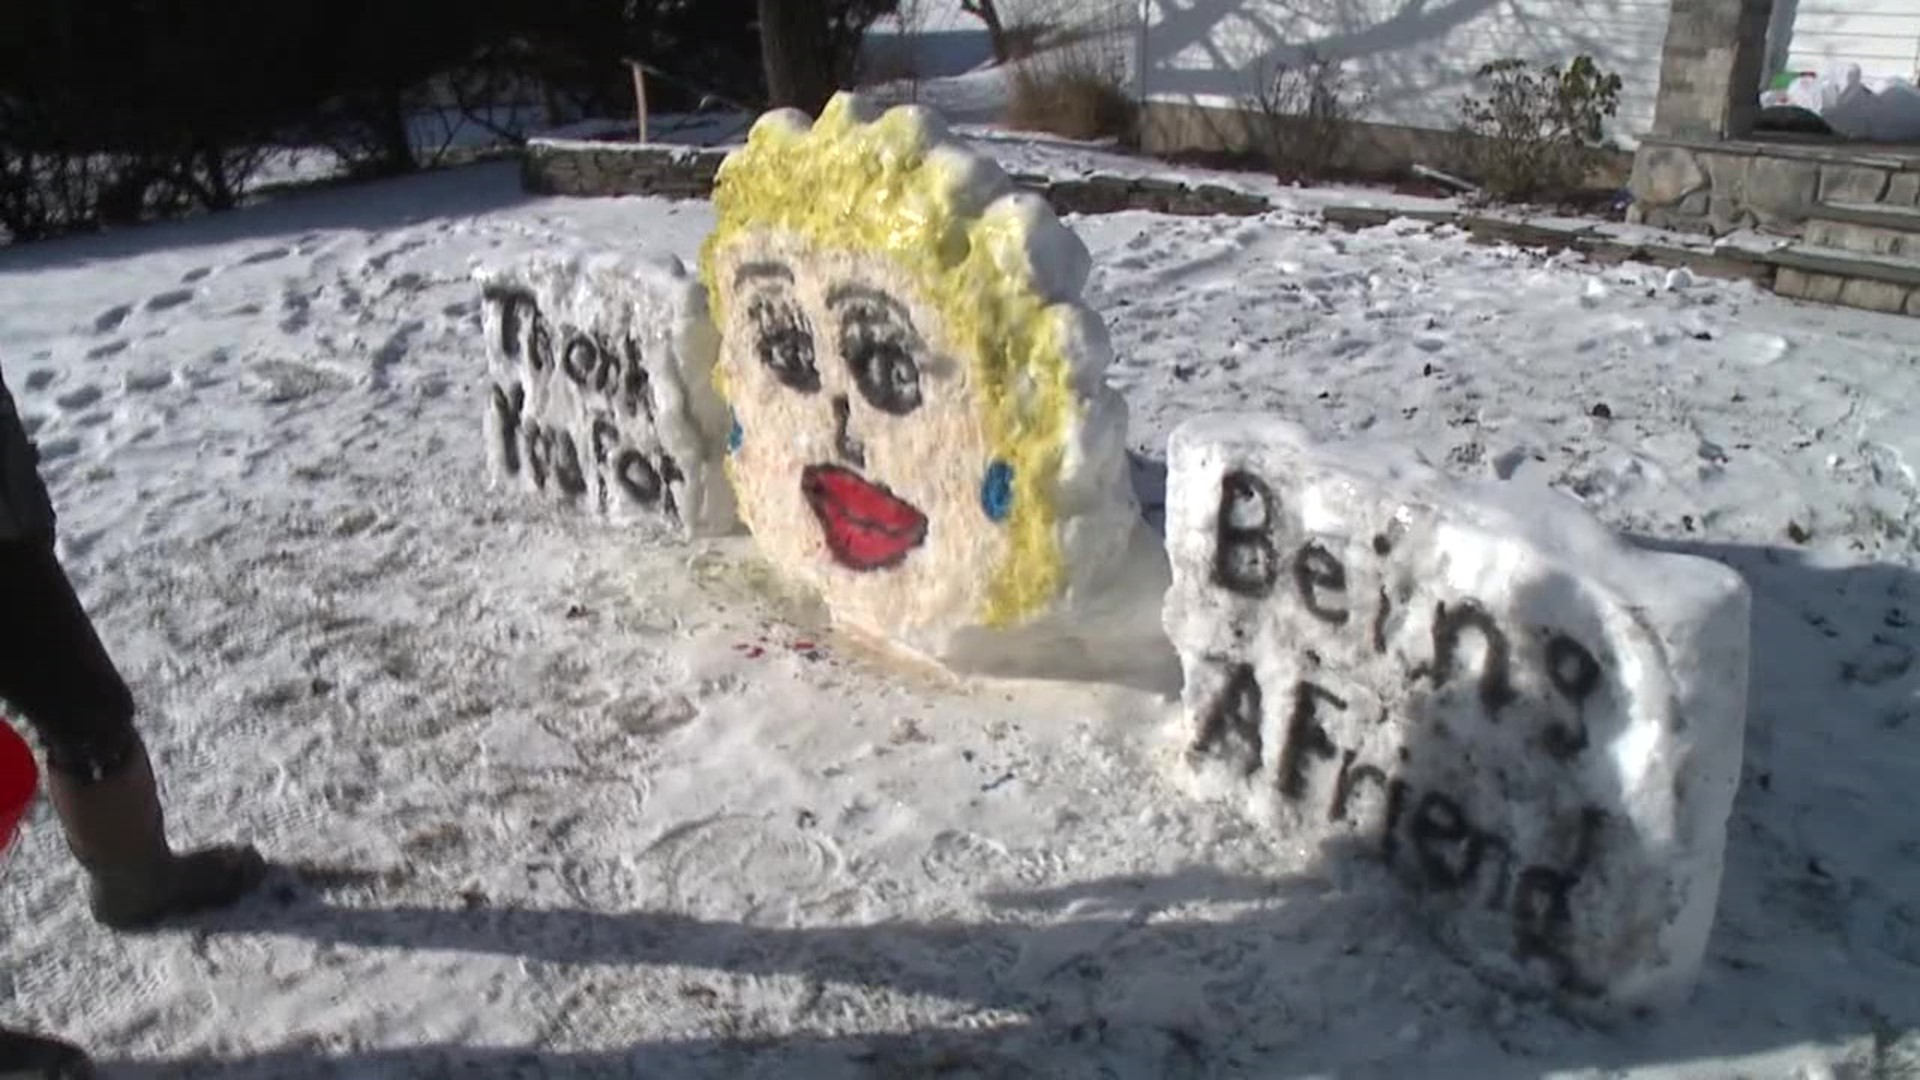 Spreading joy, honoring those who have passed, or thinking outside the box are some of the ideas behind one family's decades-long snow tradition in Luzerne County.